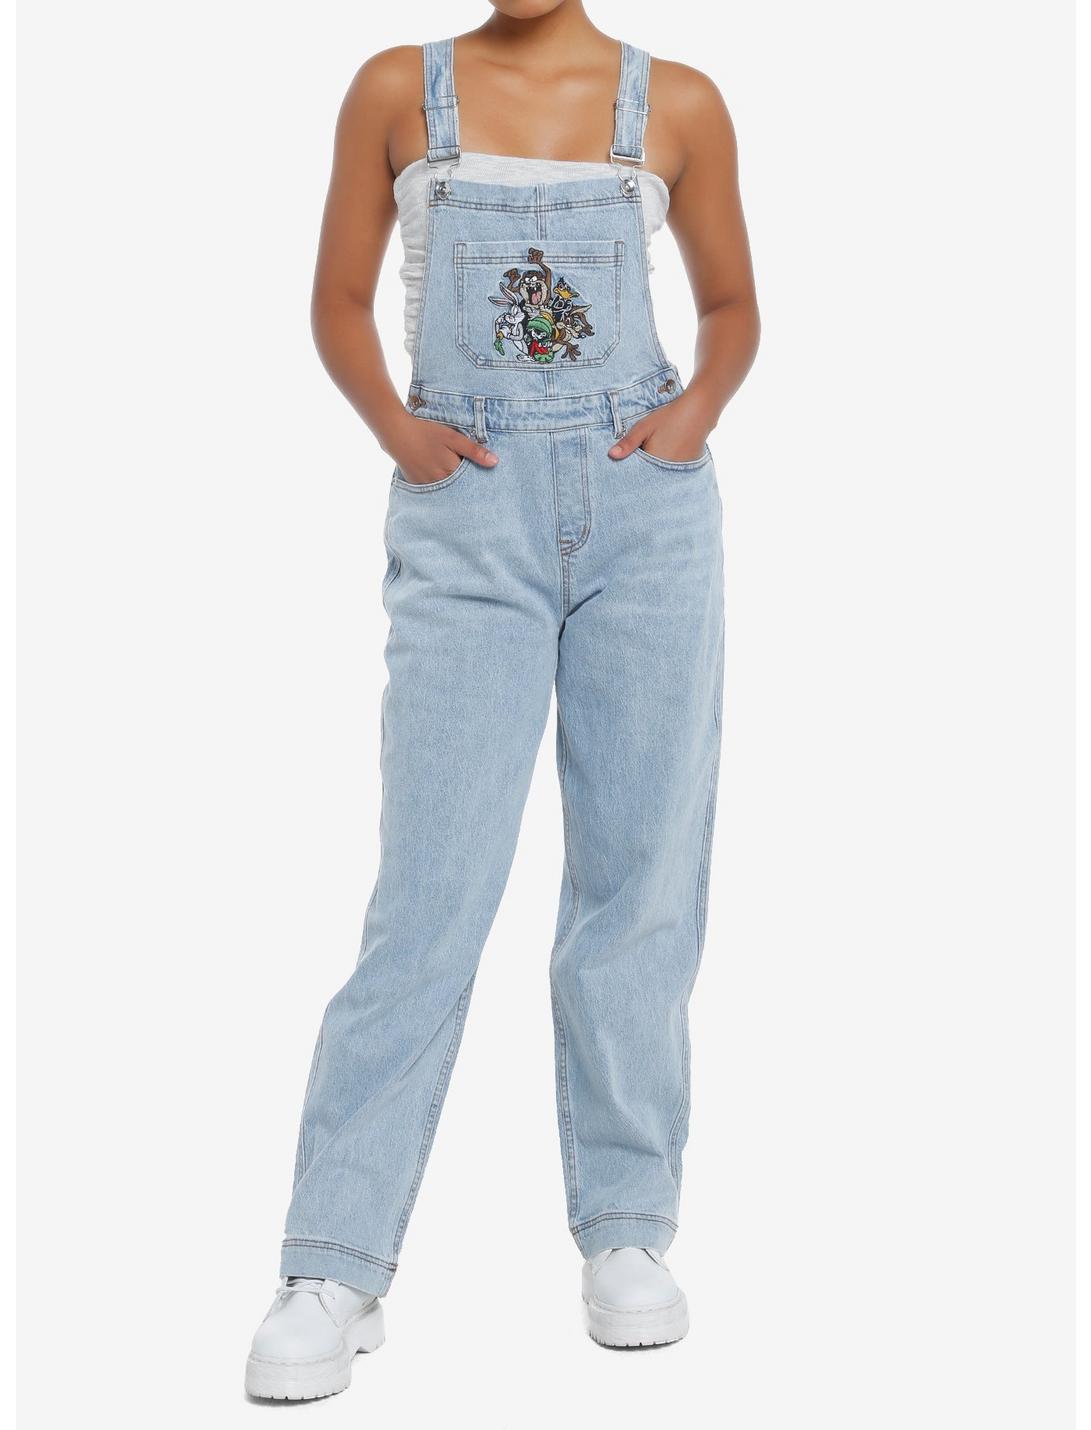 Looney Tunes Embroidered Girls Overalls, MULTI, hi-res